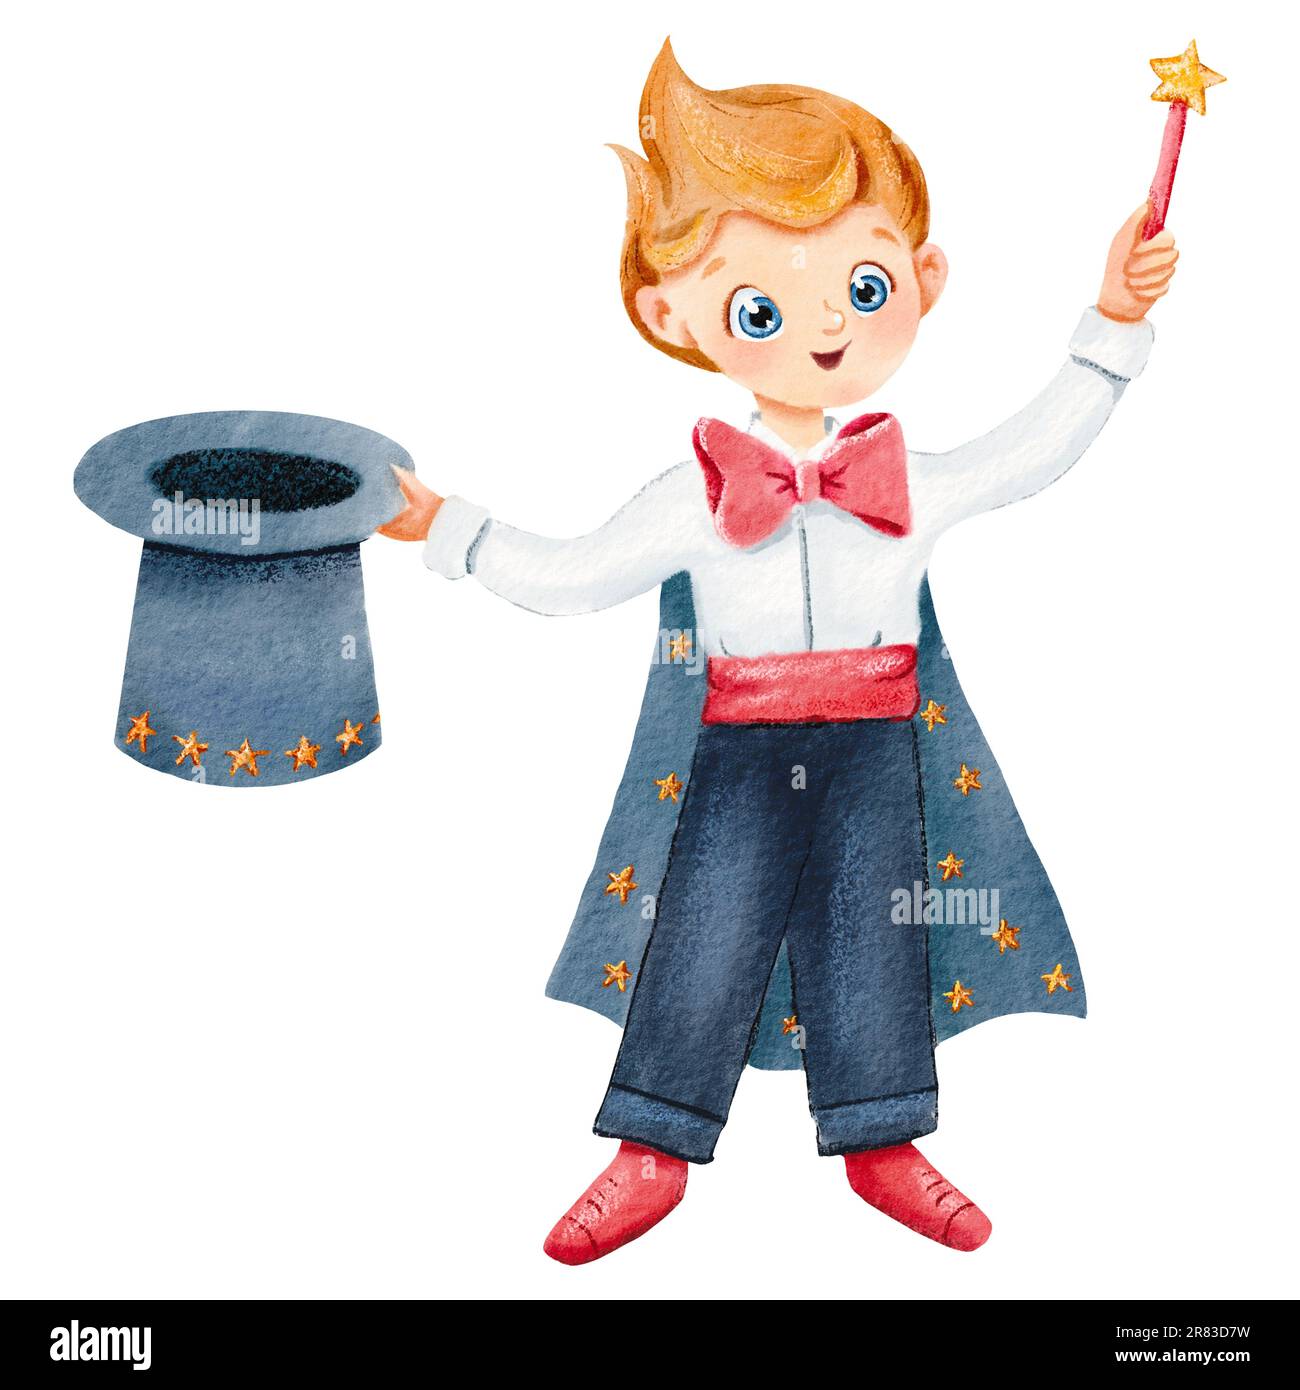 Naughty little magician. Young wizard in tailcoat, with top hat and a magic wand. Performance begins. Watercolor isolated illustration. Diversity Stock Photo